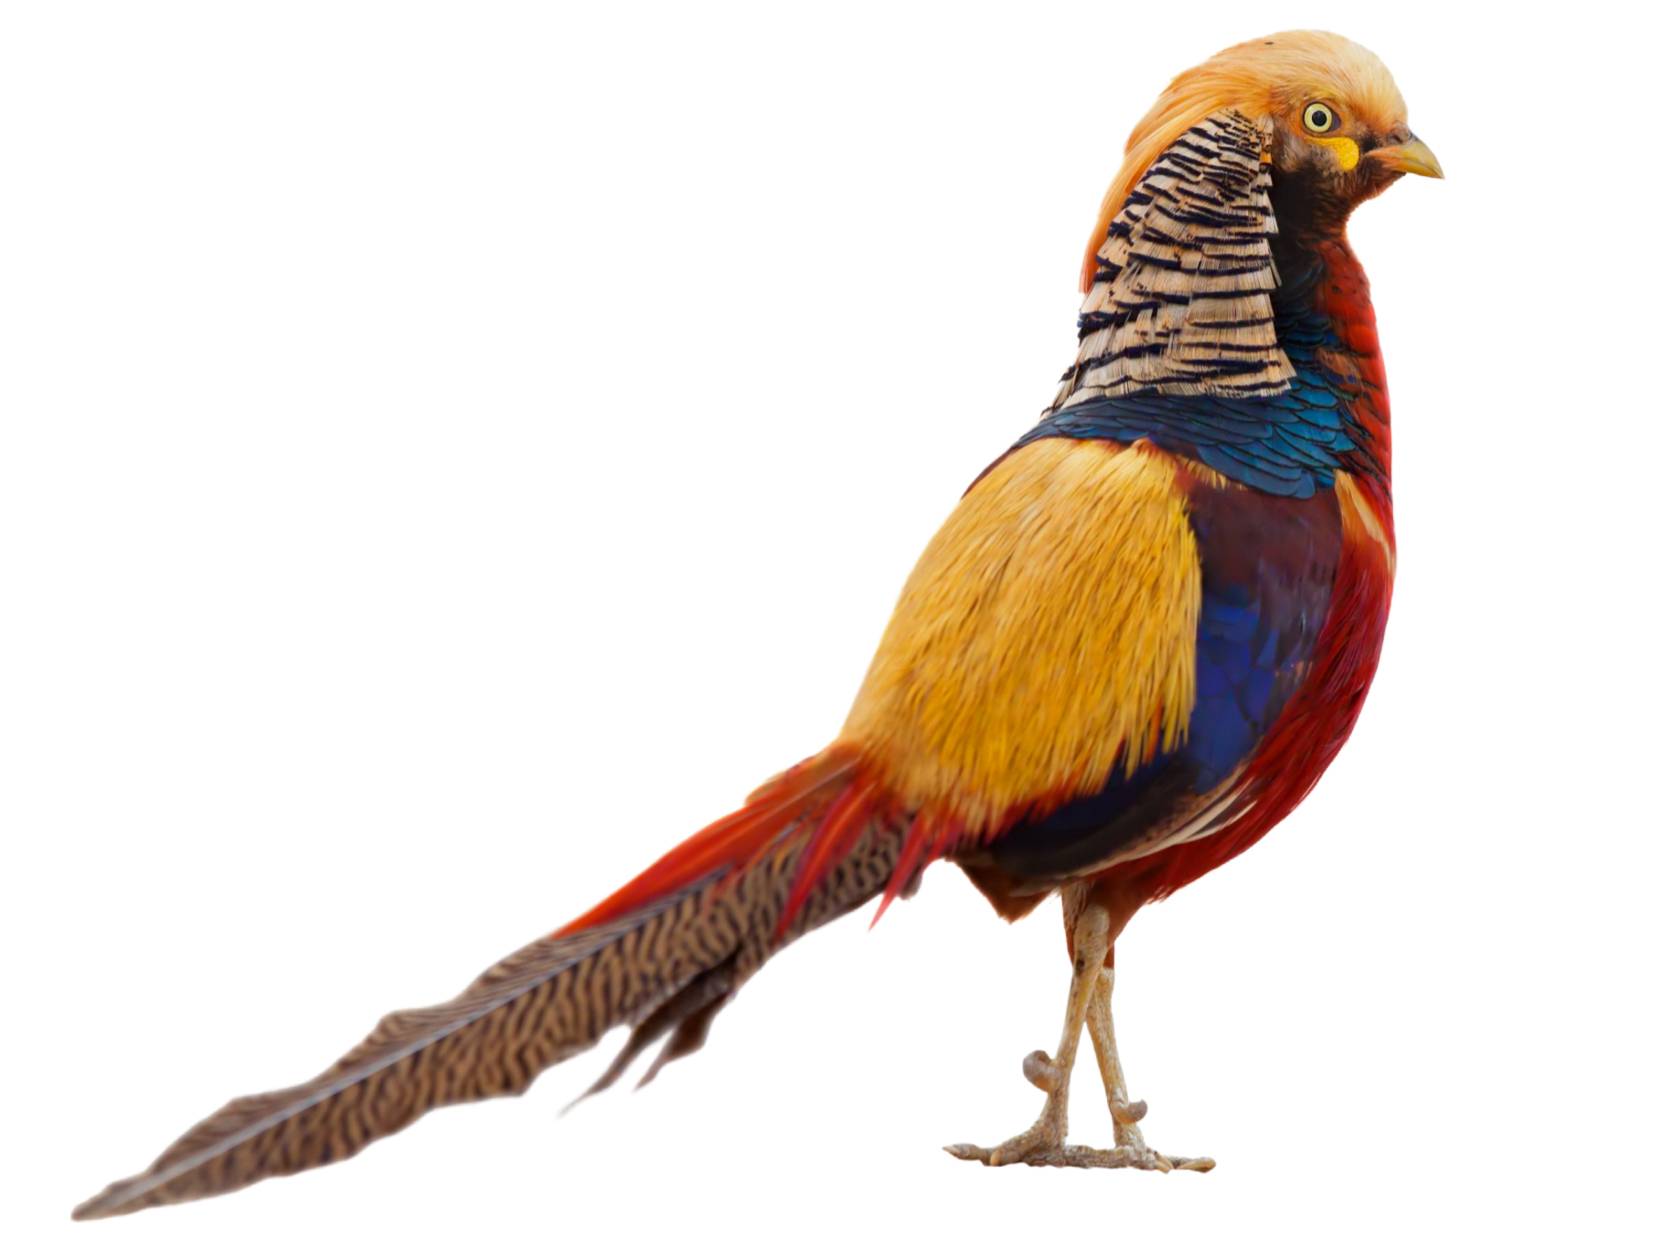 A photo of a Golden Pheasant (Chrysolophus pictus), male